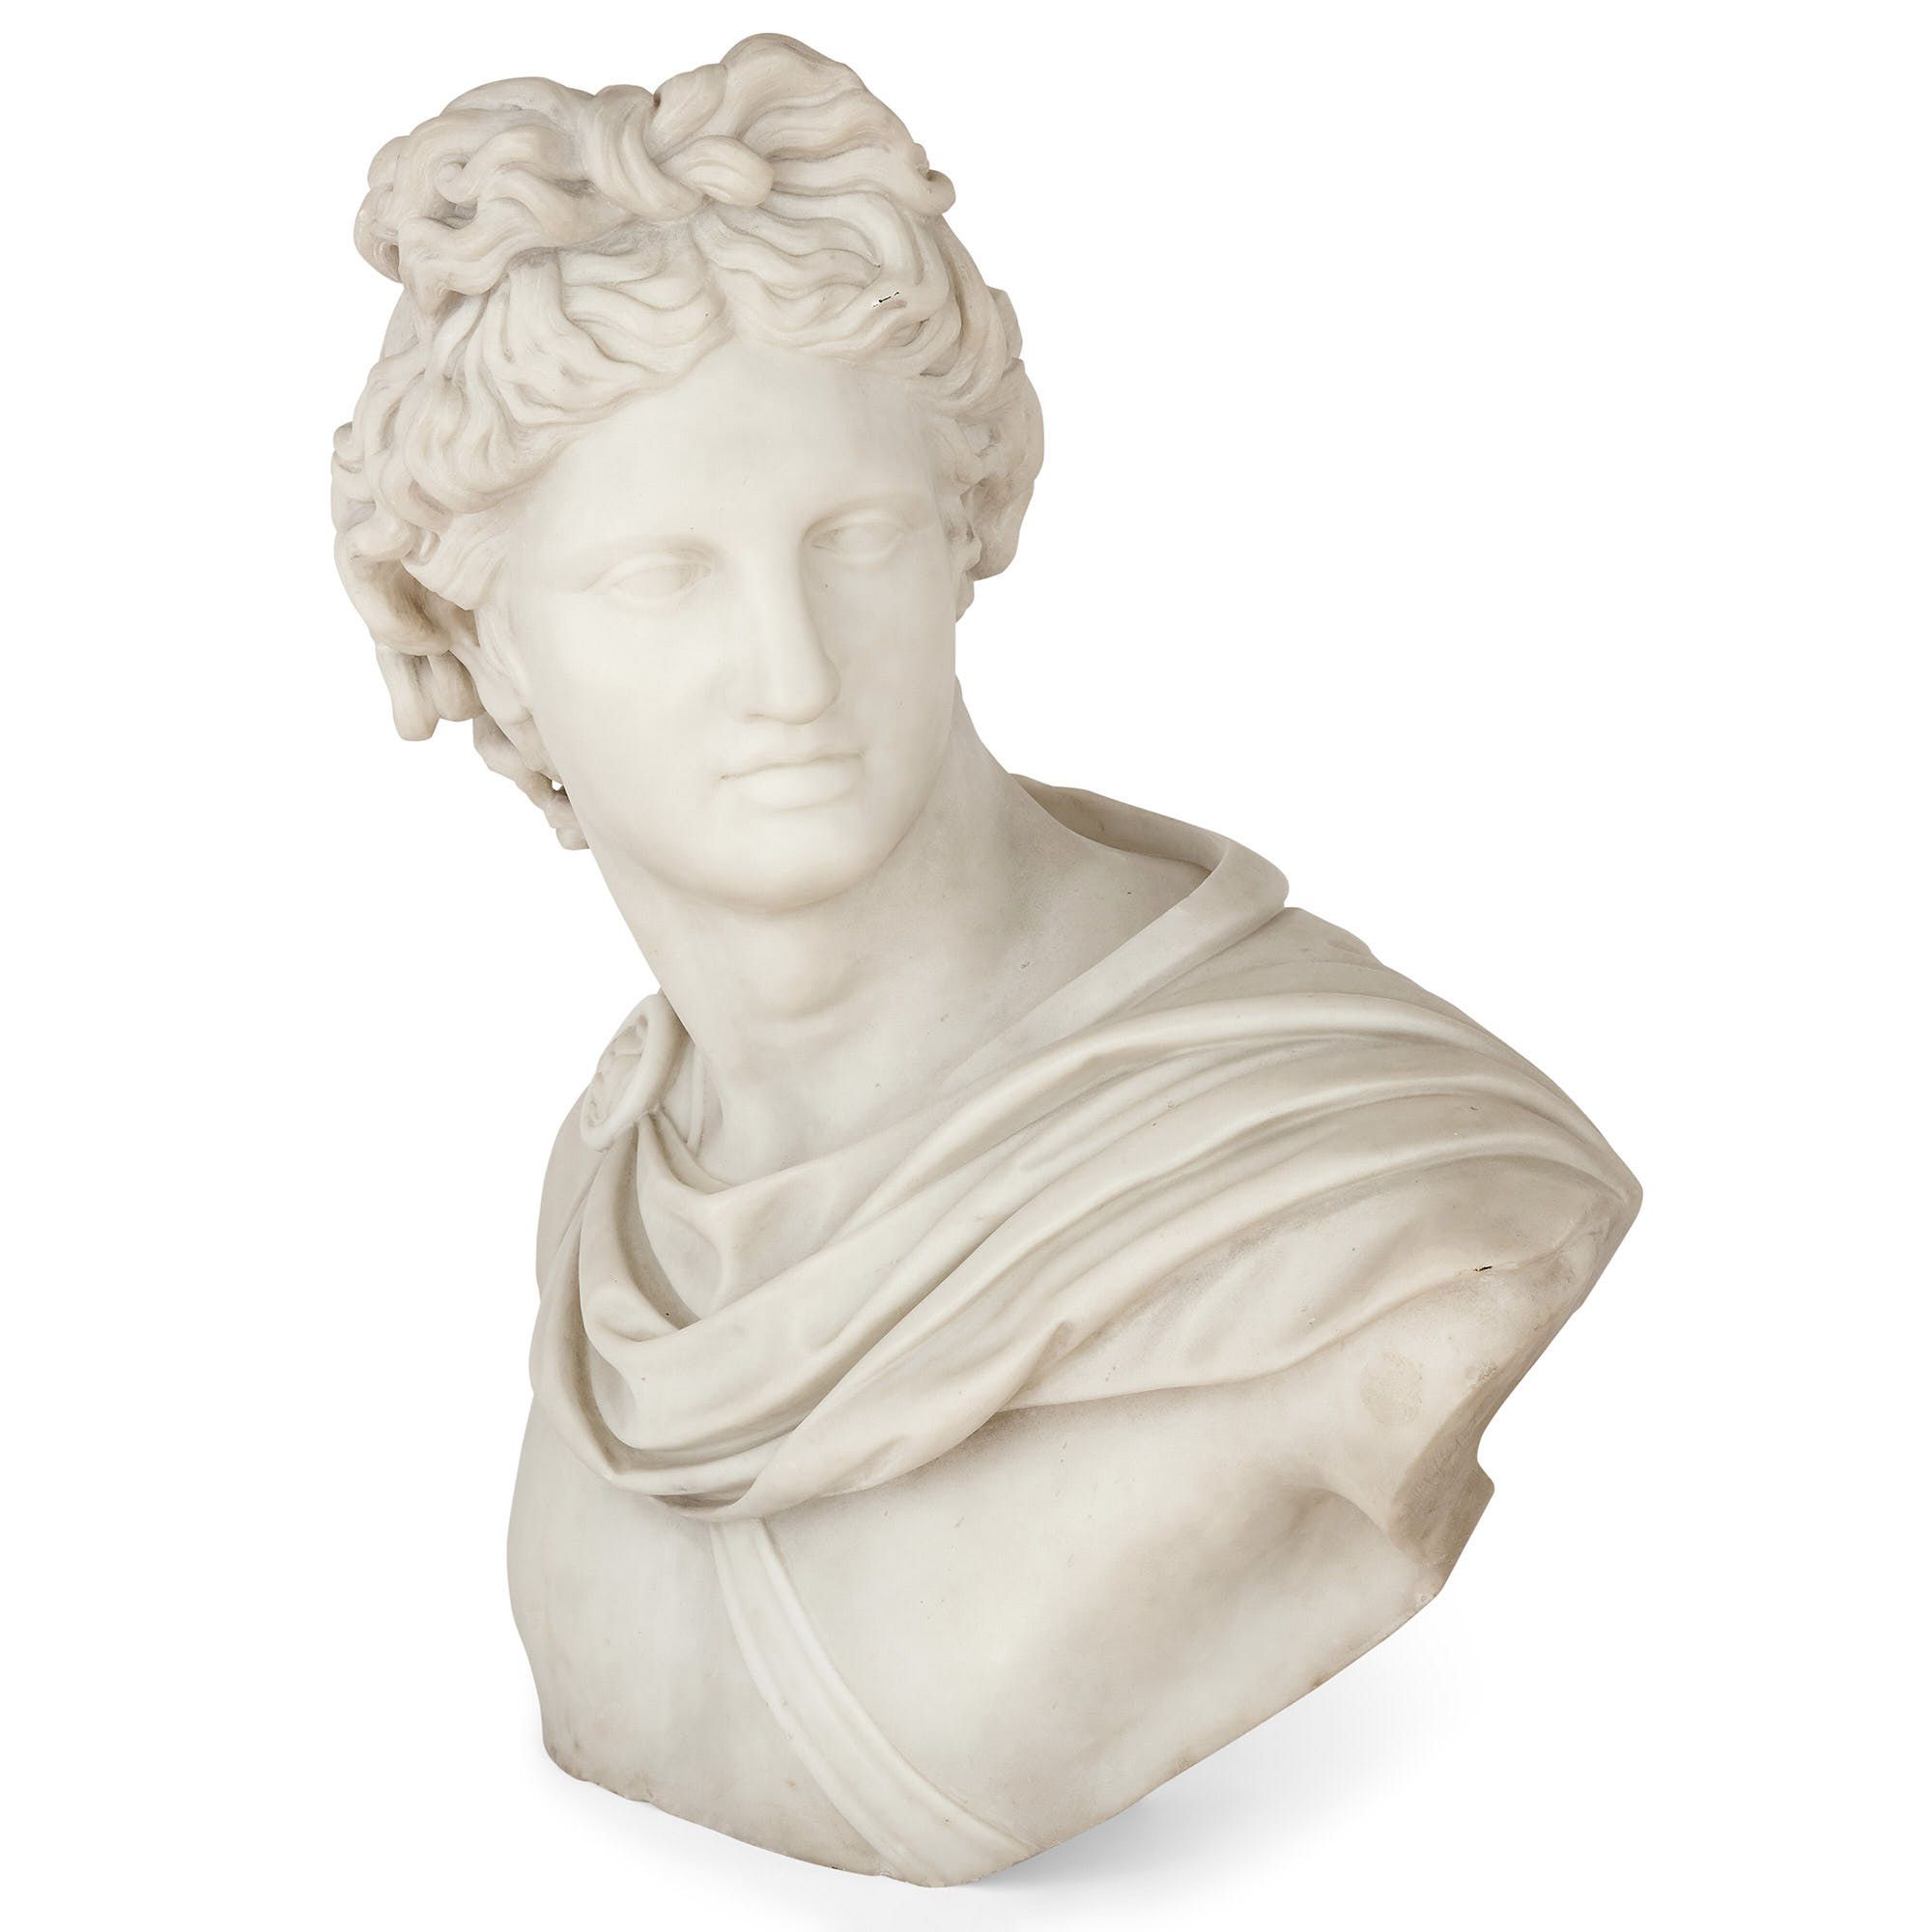 https://www.mayfairgallery.com/media/catalog/product/1/6/16325-carved-marble-bust-after-apollo-belvedere-2-2000x.jpg